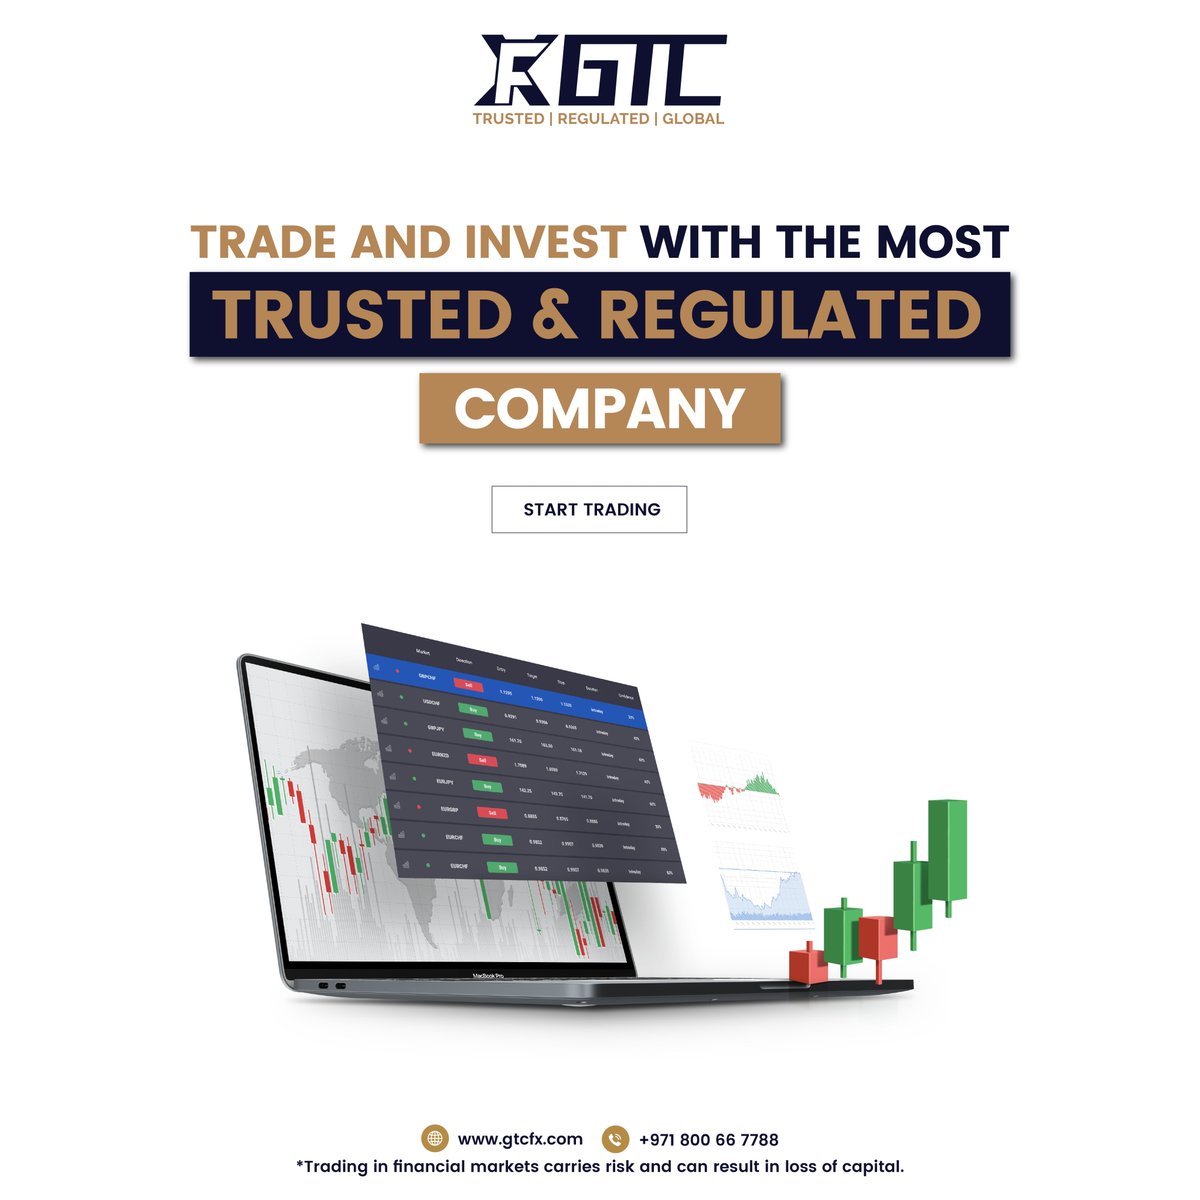 Ready to elevate your trading experience?

Join GTC Group, the most trusted and regulated company. Start your trading journey today and unleash your full potential!

#Trading #Investing #GTCGroup #GTCFX